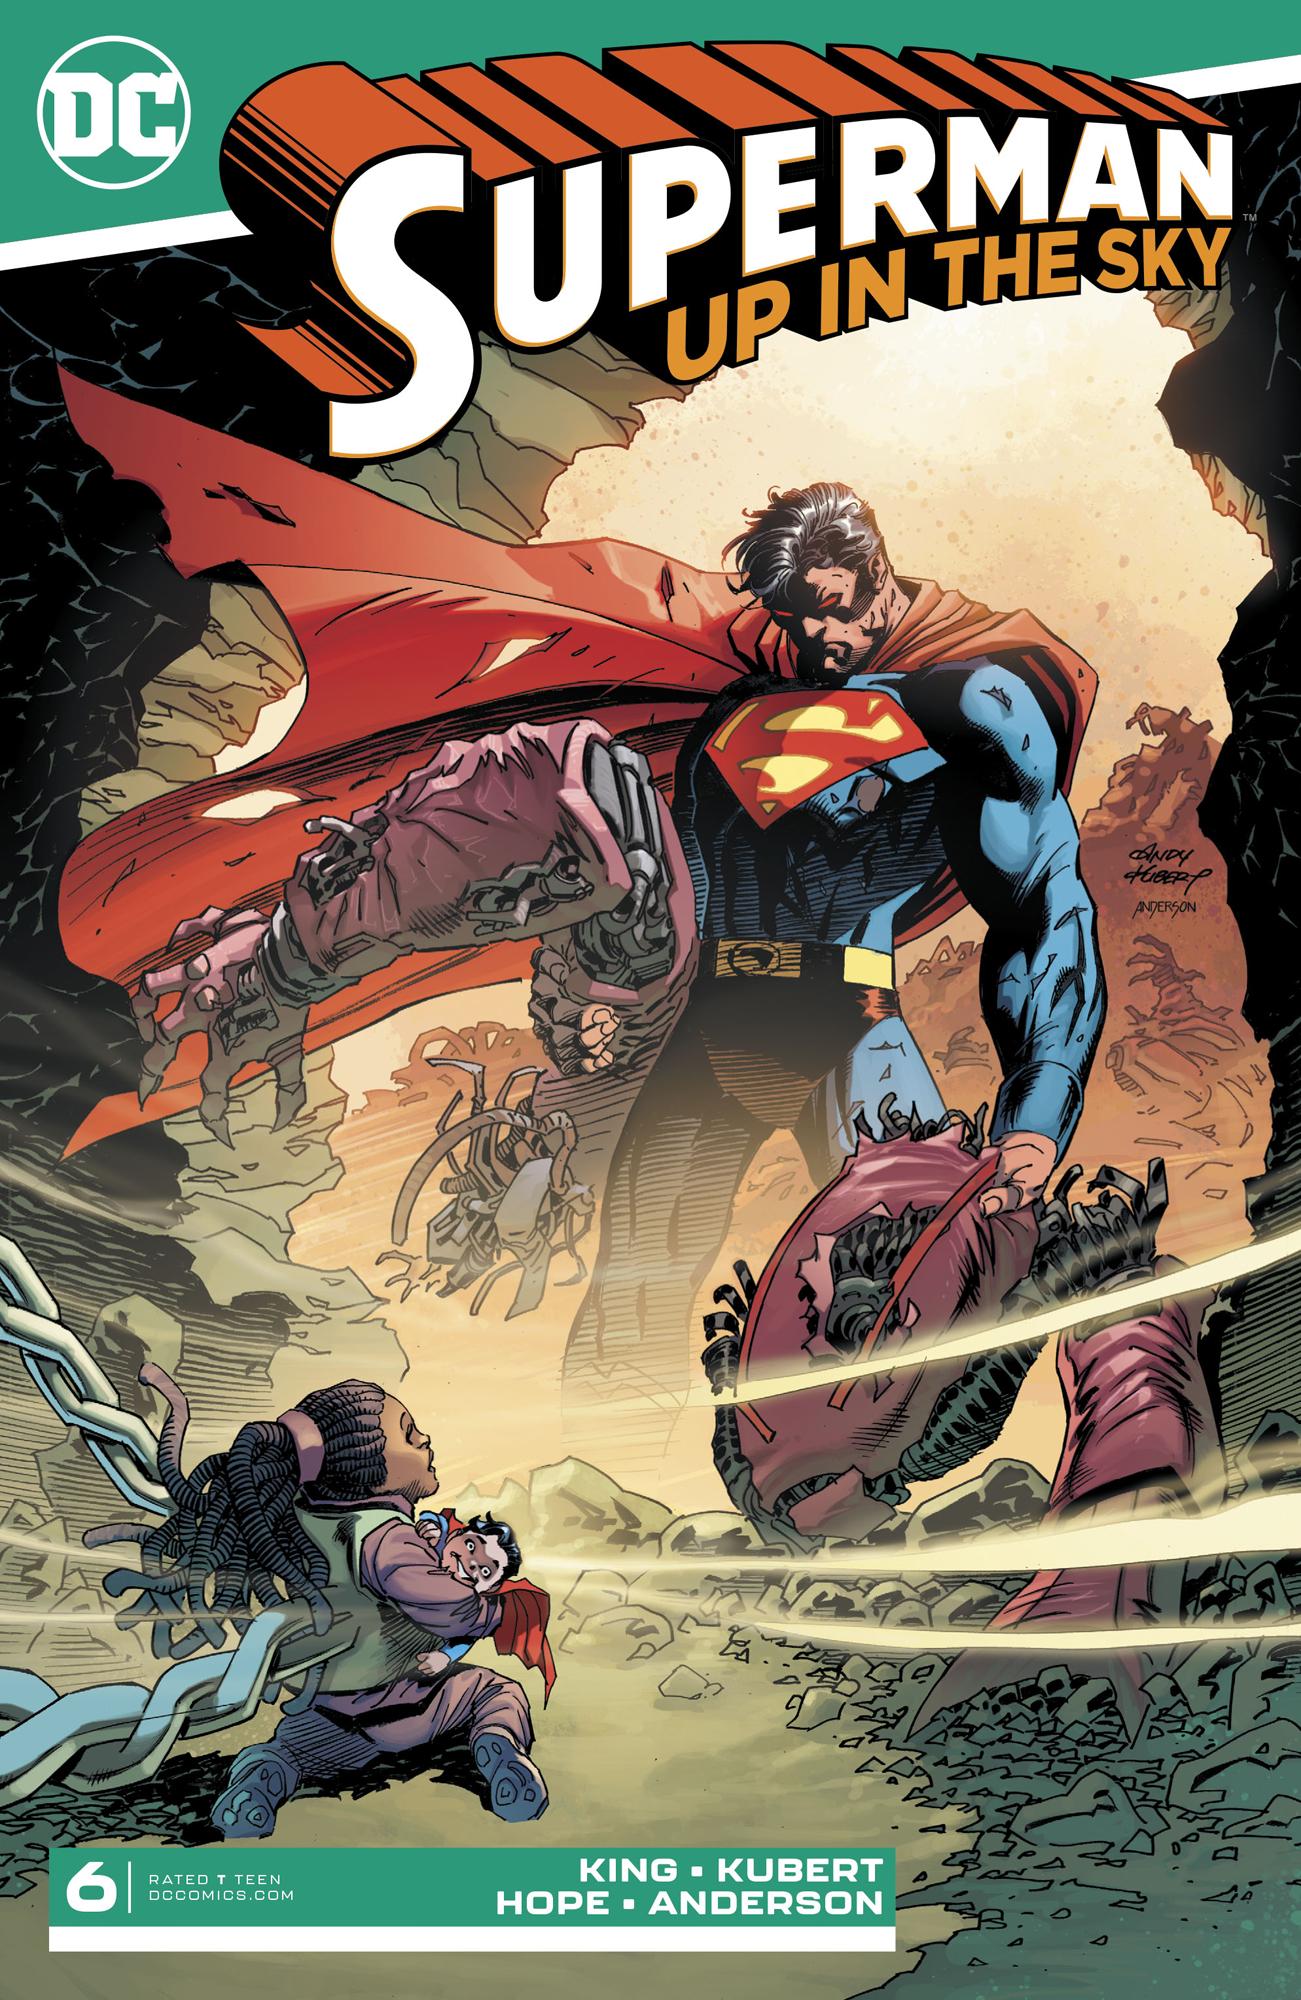 Superman: Up in the Sky Vol. 1 #6